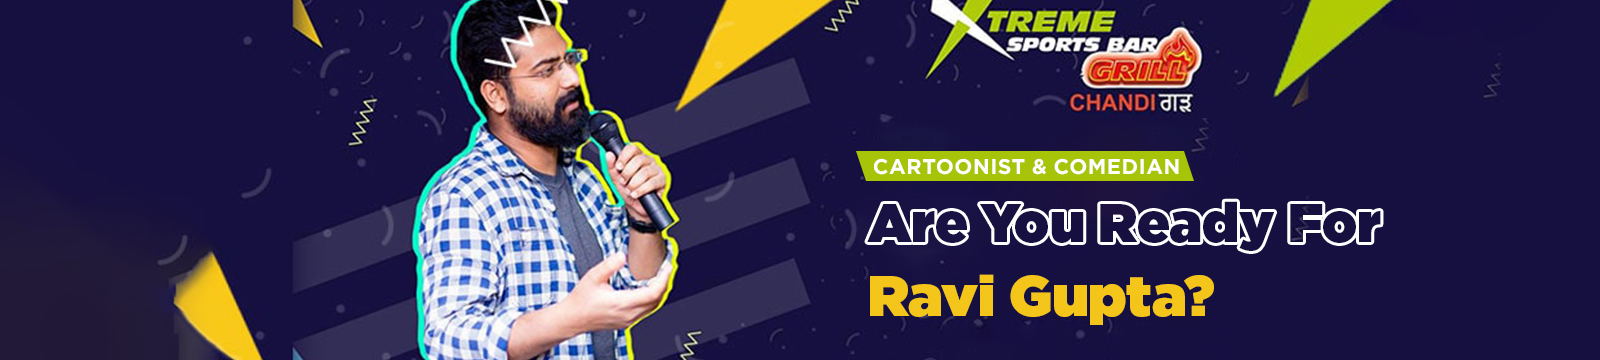 Cartoonist & Comedian… Are you ready for Ravi Gupta?